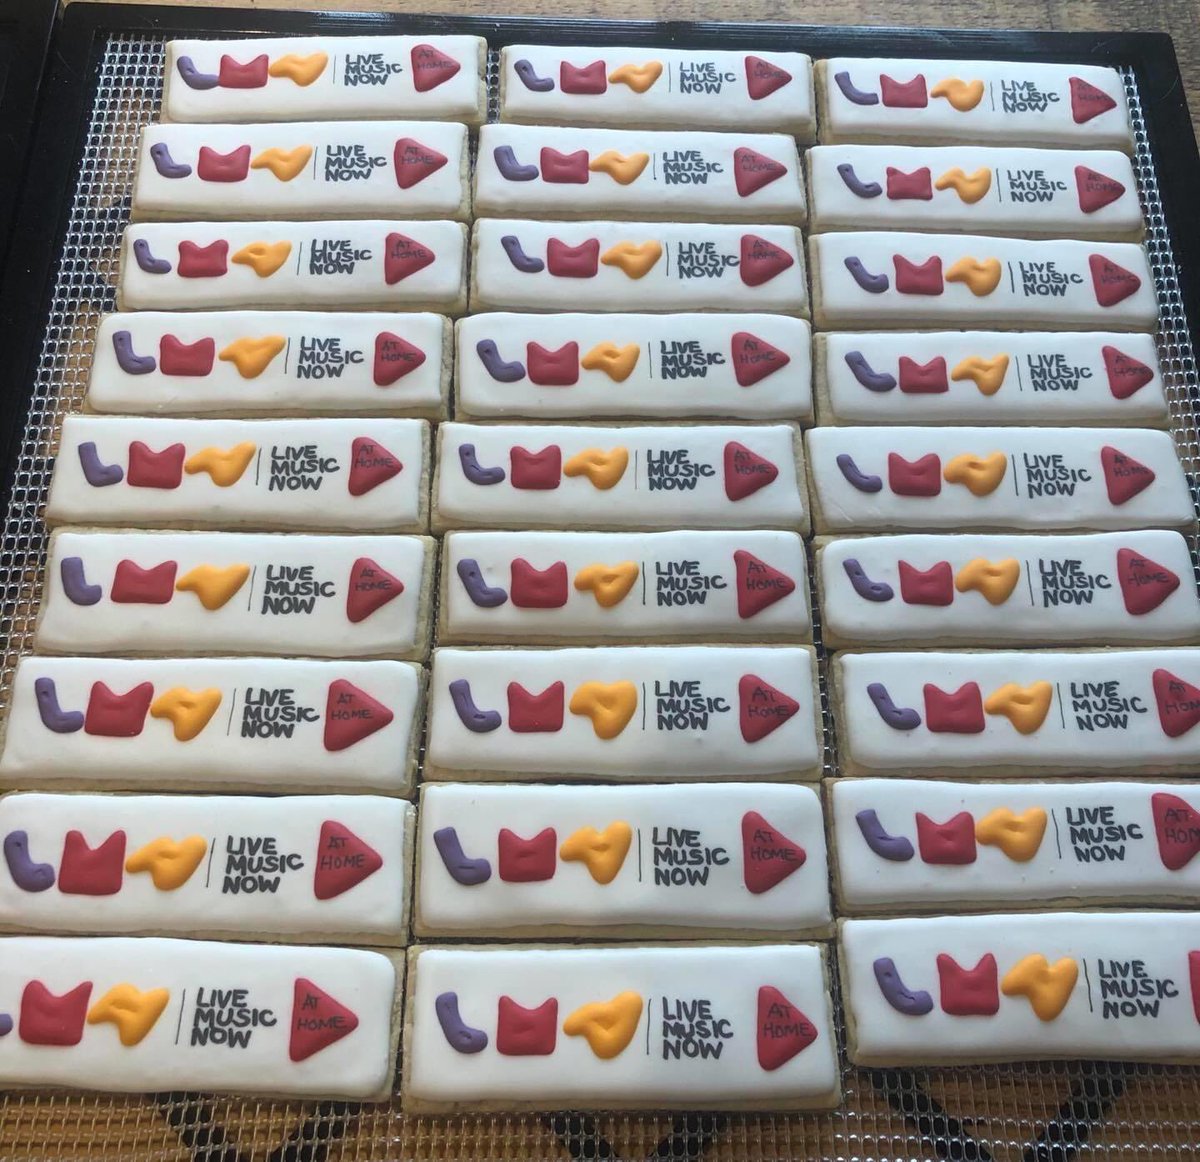 Special #LMNatHome cookies have been made in #Wales to go in our end of session boxes for families who have benefited from 8 weeks of 1-1 live music sessions over Zoom since lockdown, thanks to funds from @Arts_Wales_ and @TNLComFundWales #AwardsforAll. TQ #hokeycokeycookies !